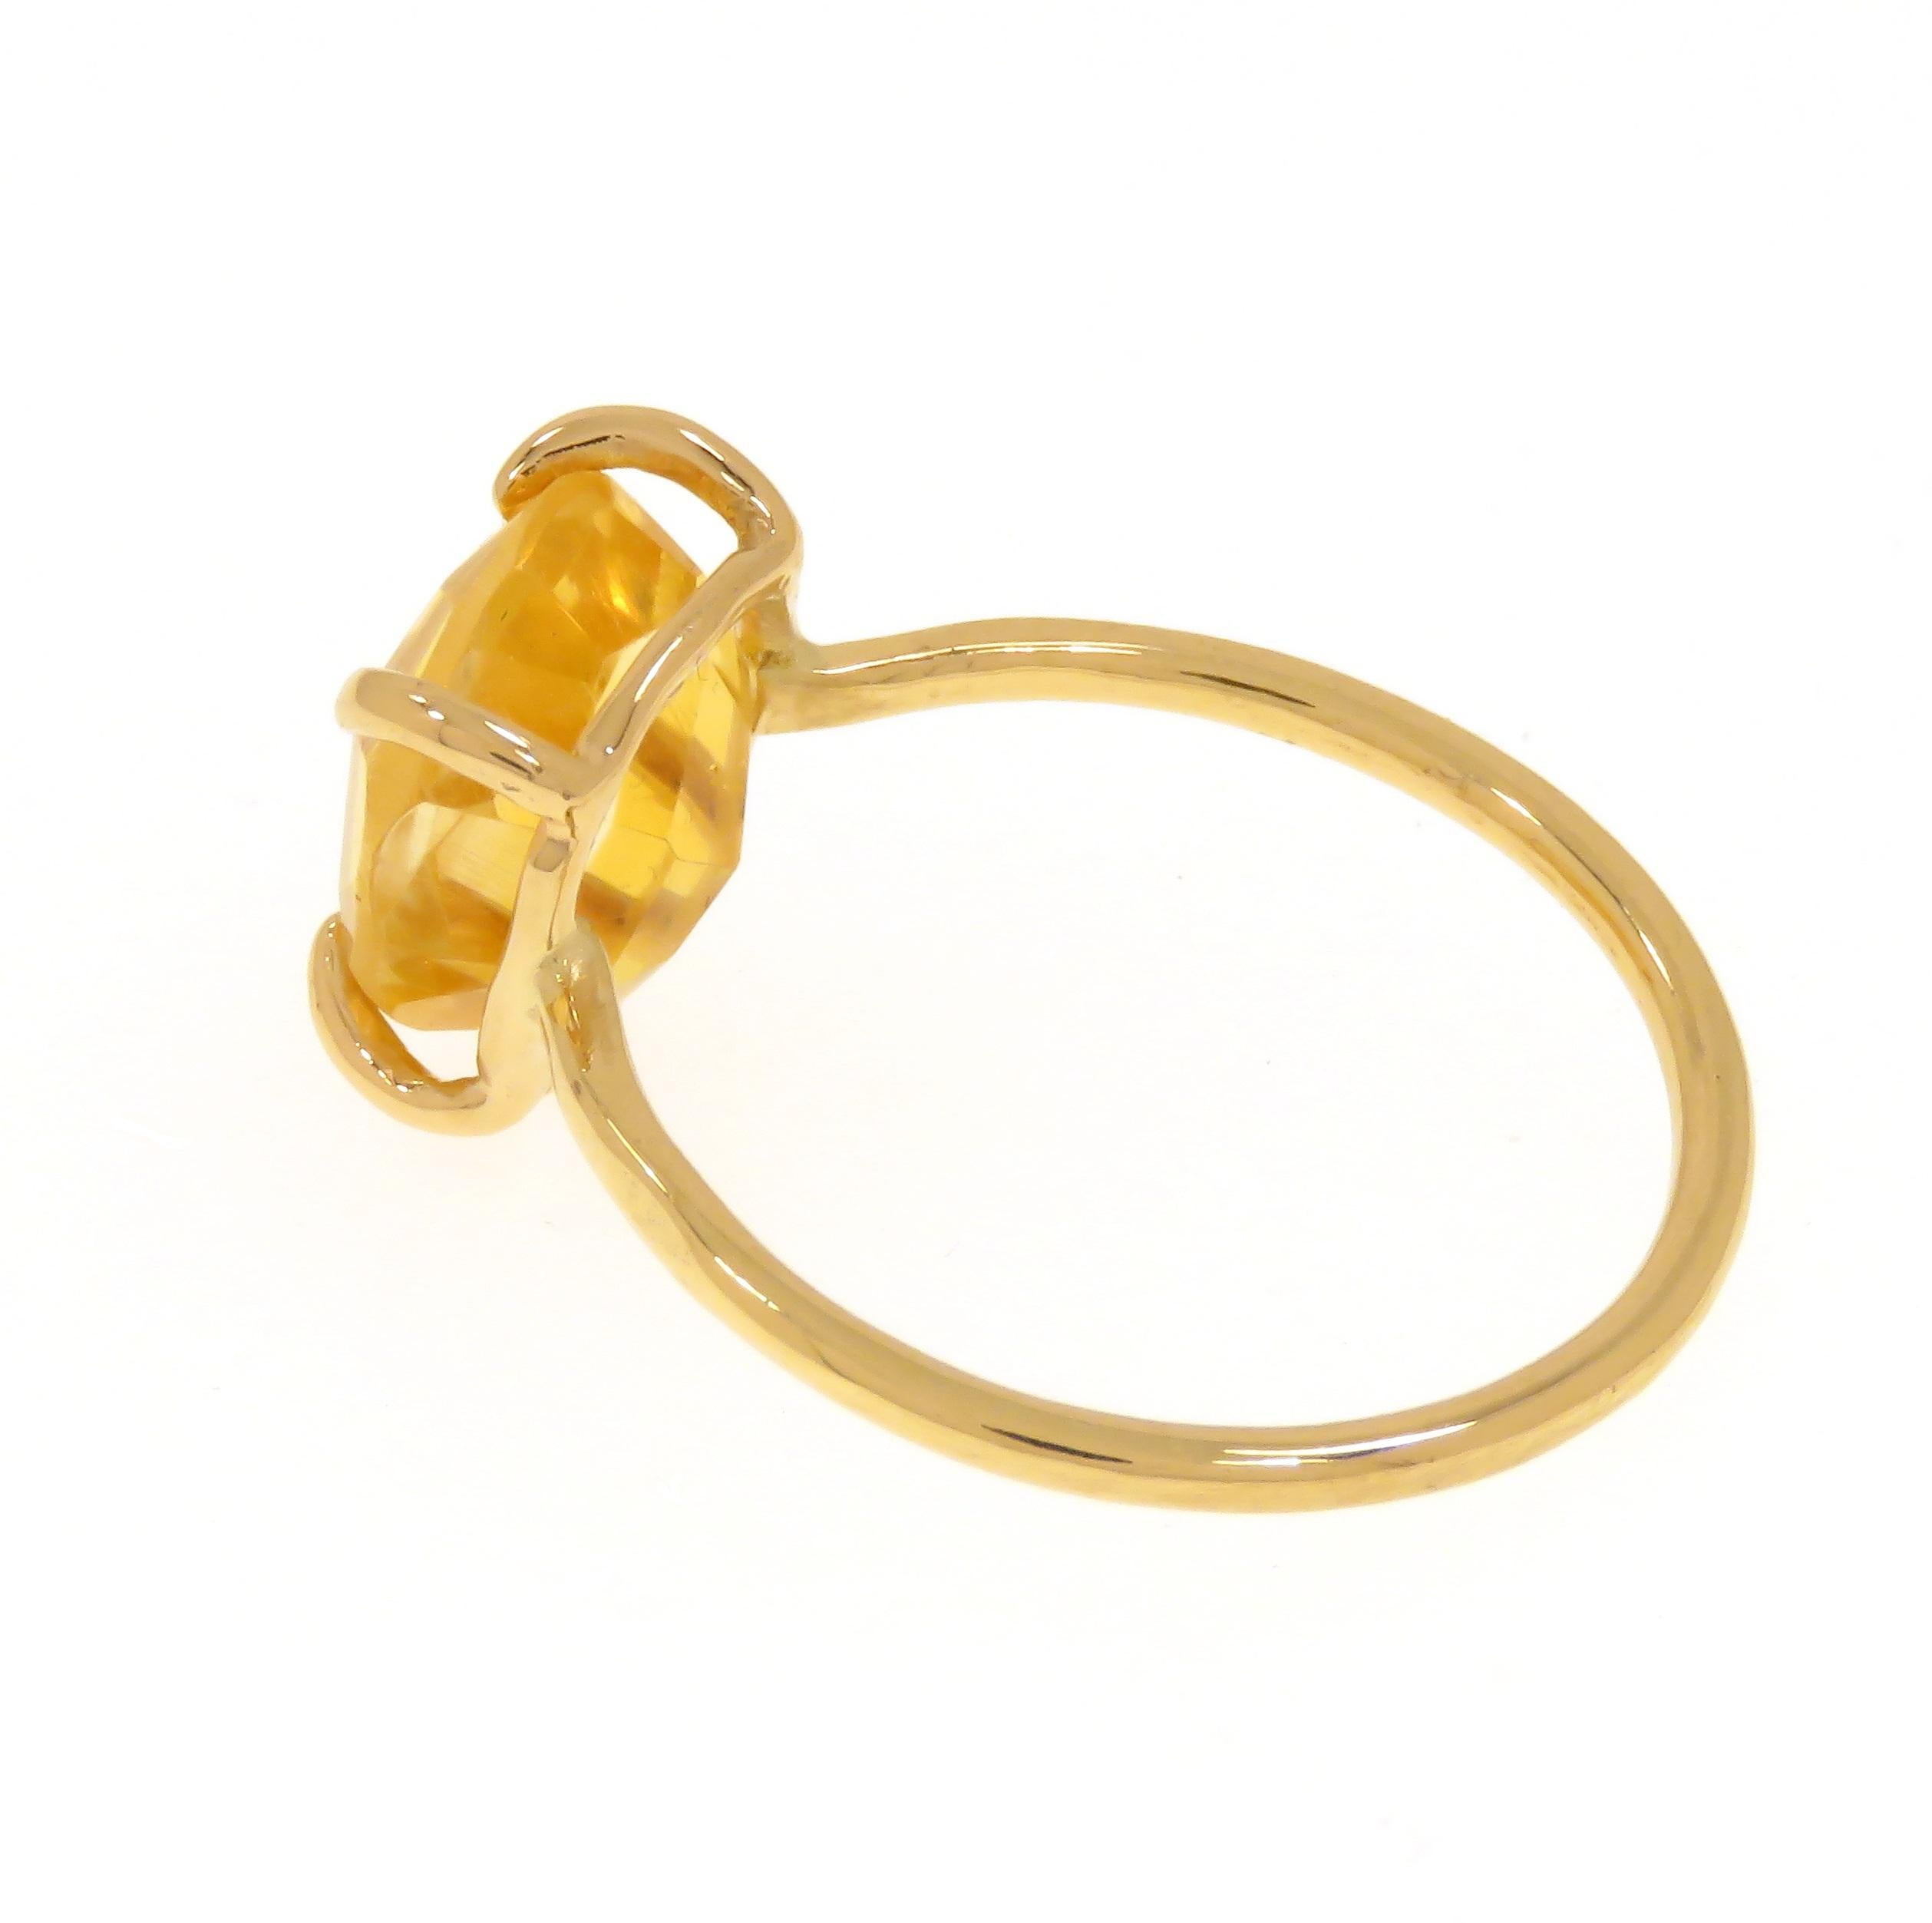 Antique Cut Yellow Citrine 9 Karat Rose Gold Ring Handcrafted in Italy In New Condition For Sale In Milano, IT